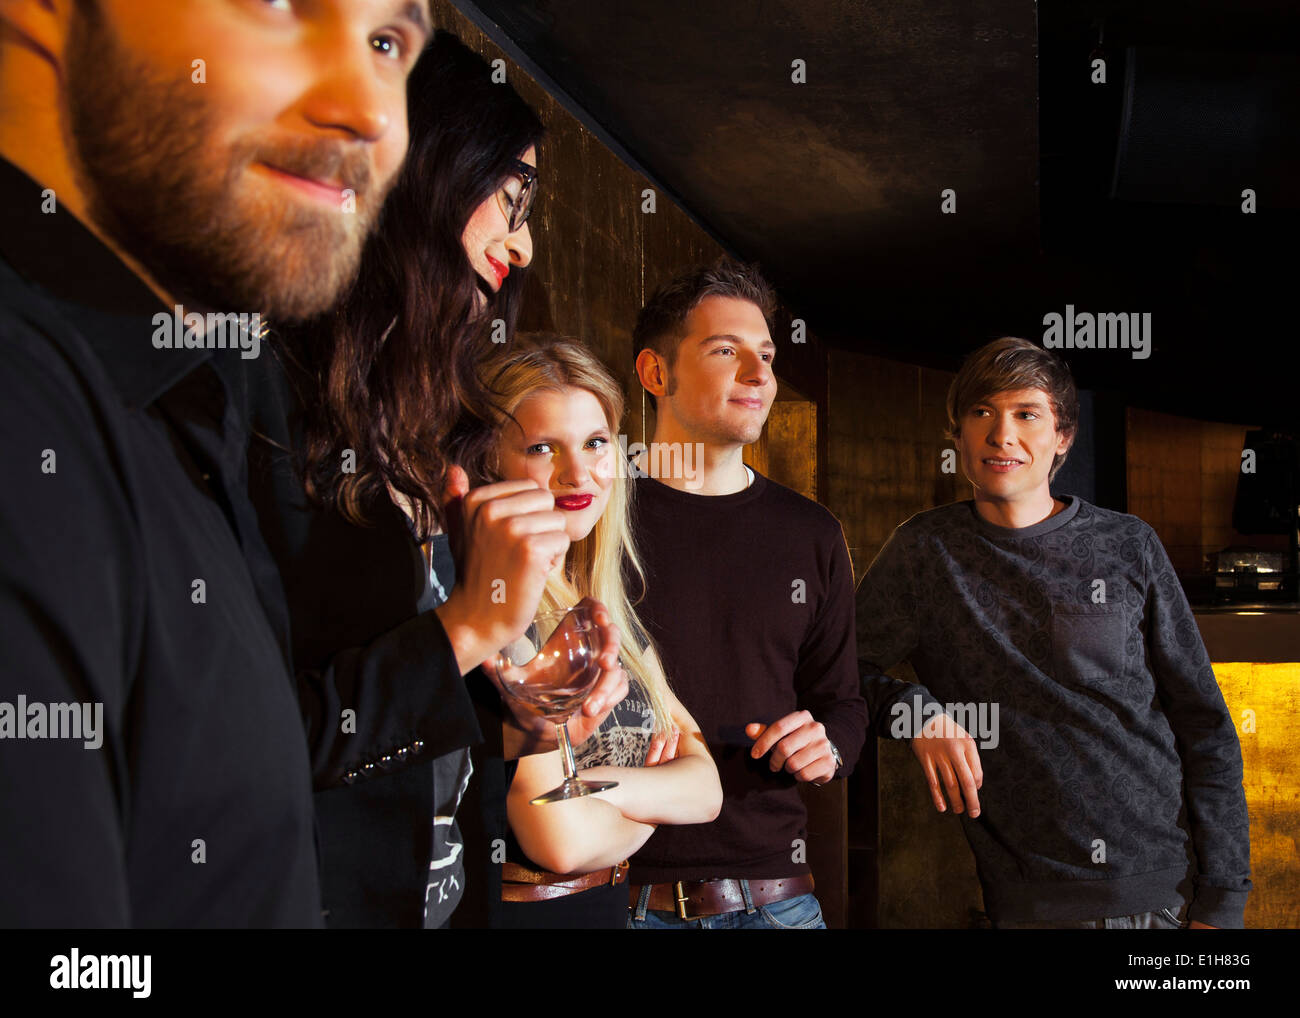 Group of friends in nightclub Stock Photo